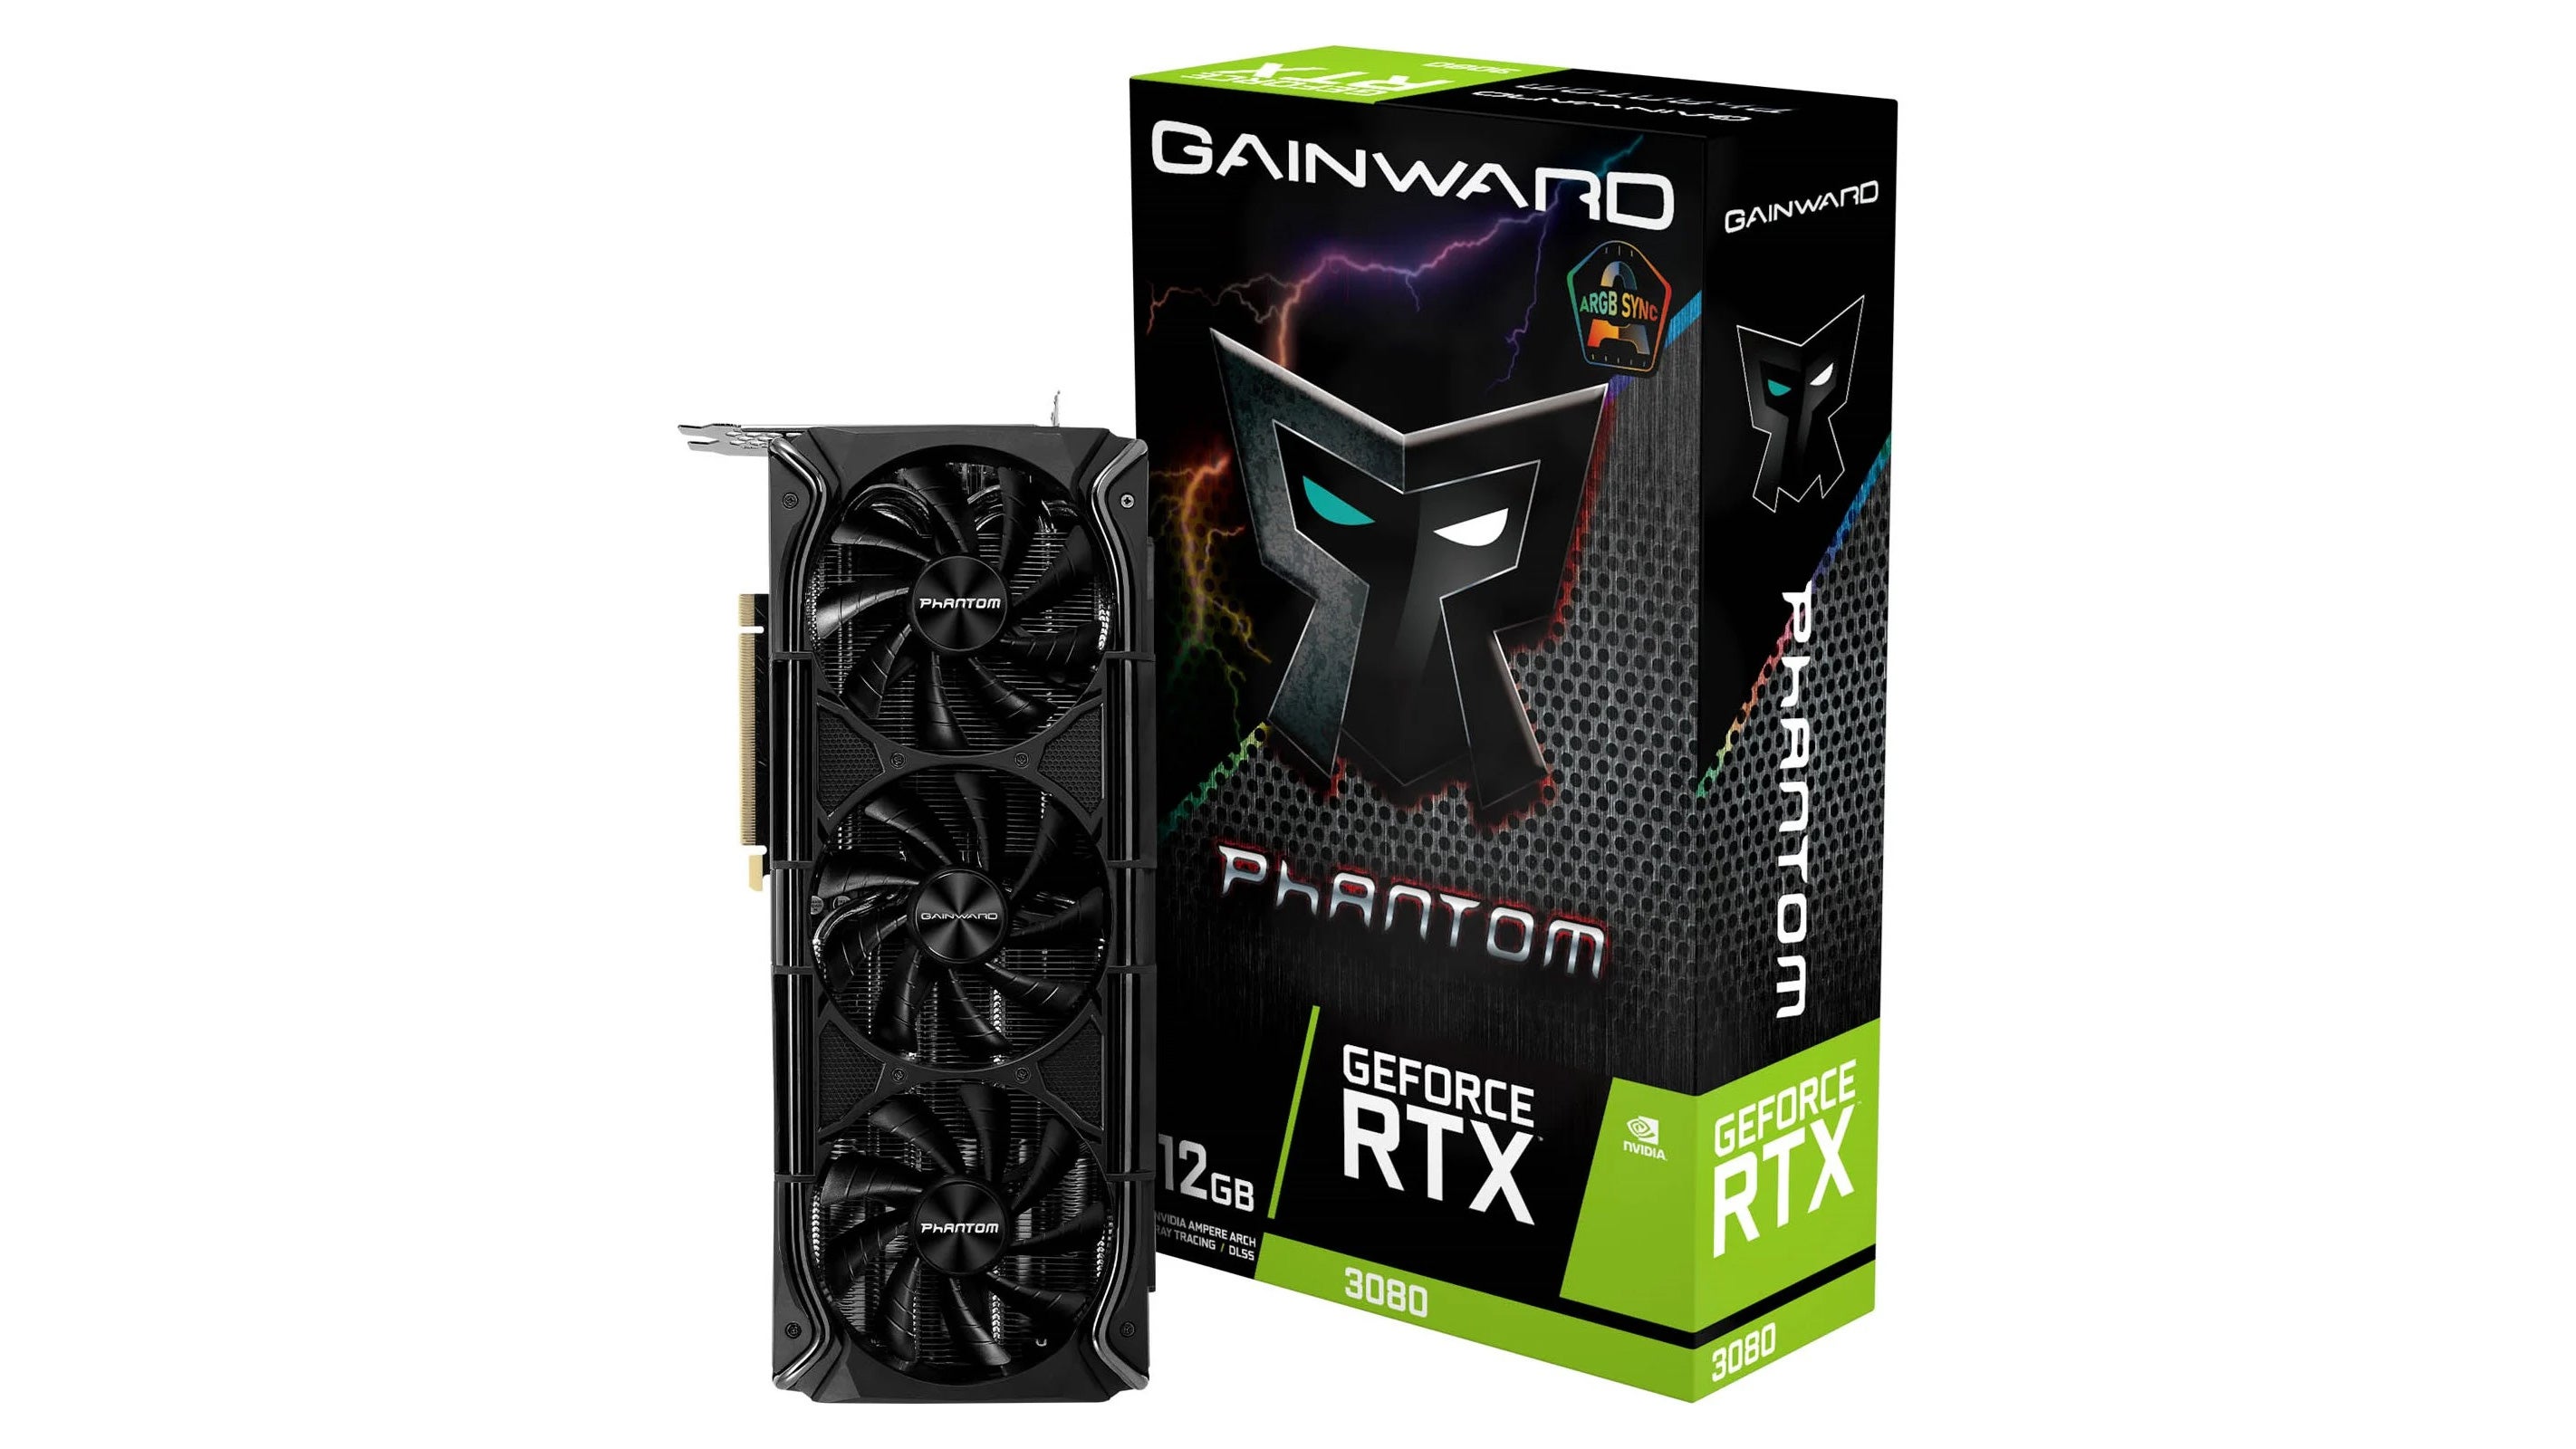 Pick up an RTX 3080 for £724 today thanks to a CCL discount code